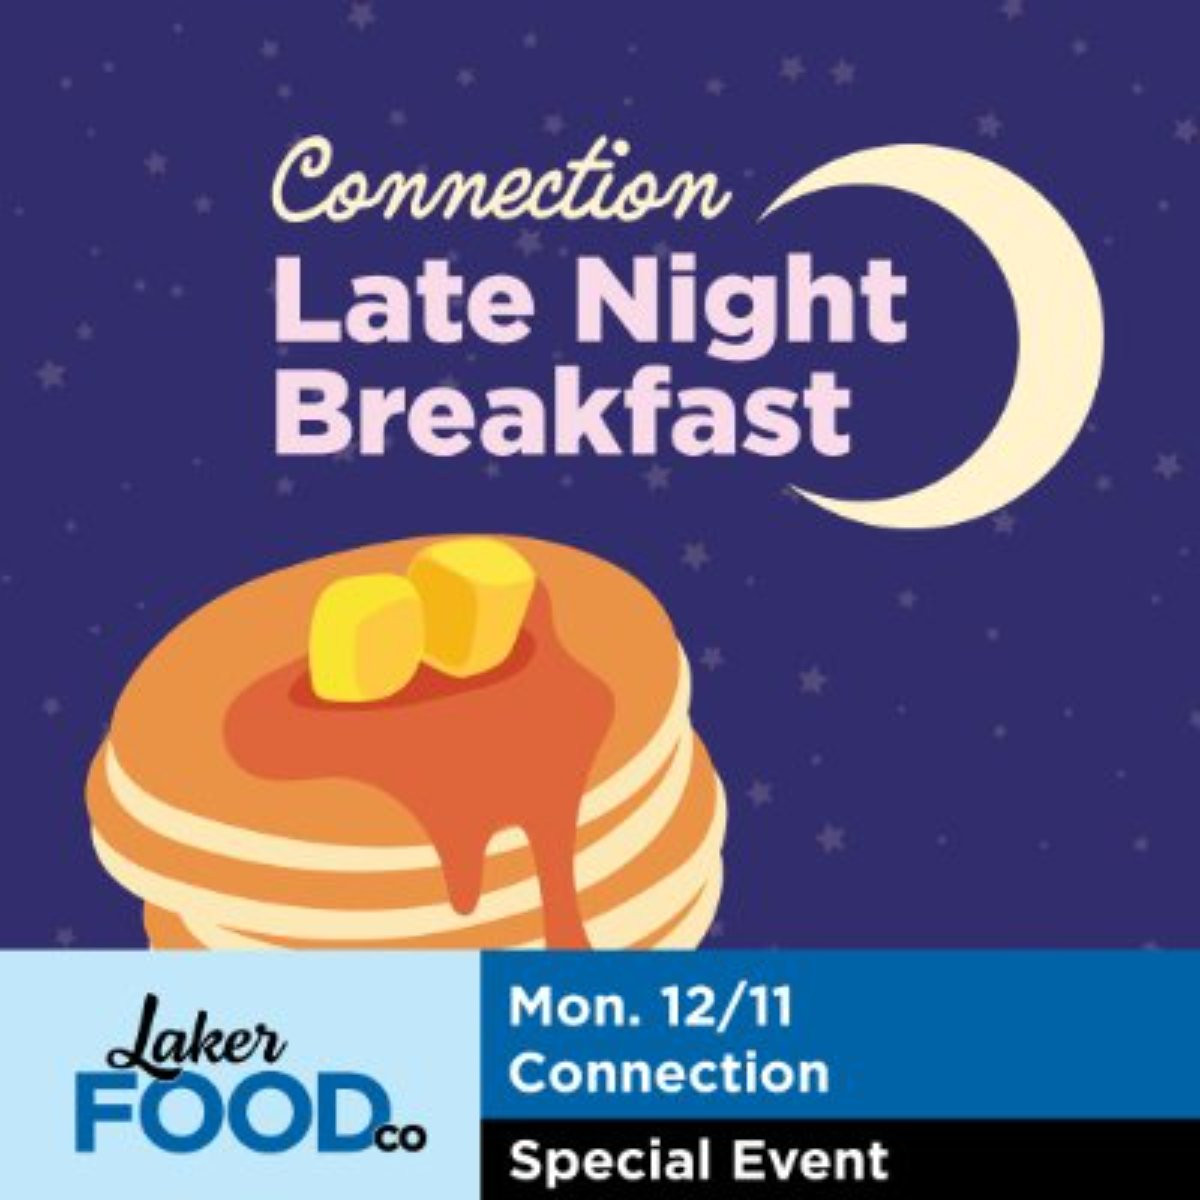 A picture of pancakes and a moon with text that reads Connection Late Night Breakfast Monday 12/11 Connection Special Event with the Laker Food Co. Logo